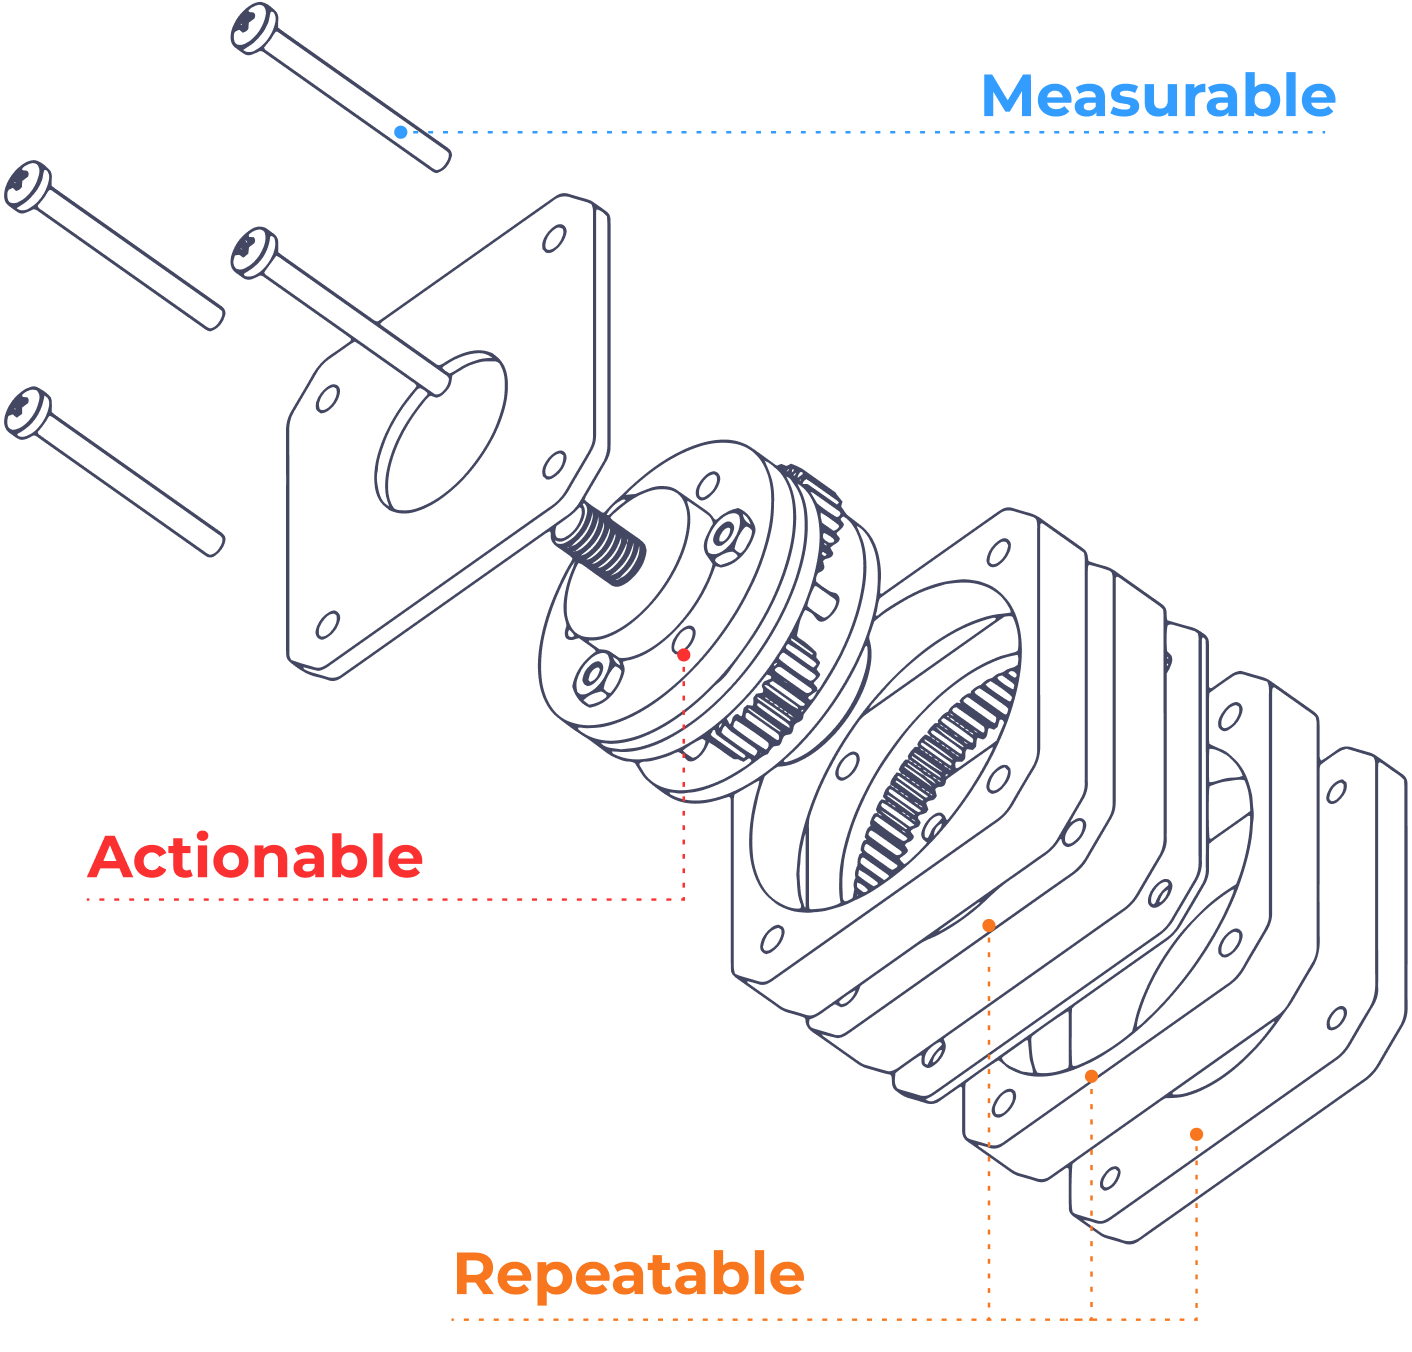 RevOps Gearbox - Measurable, Actionable, Repeatable